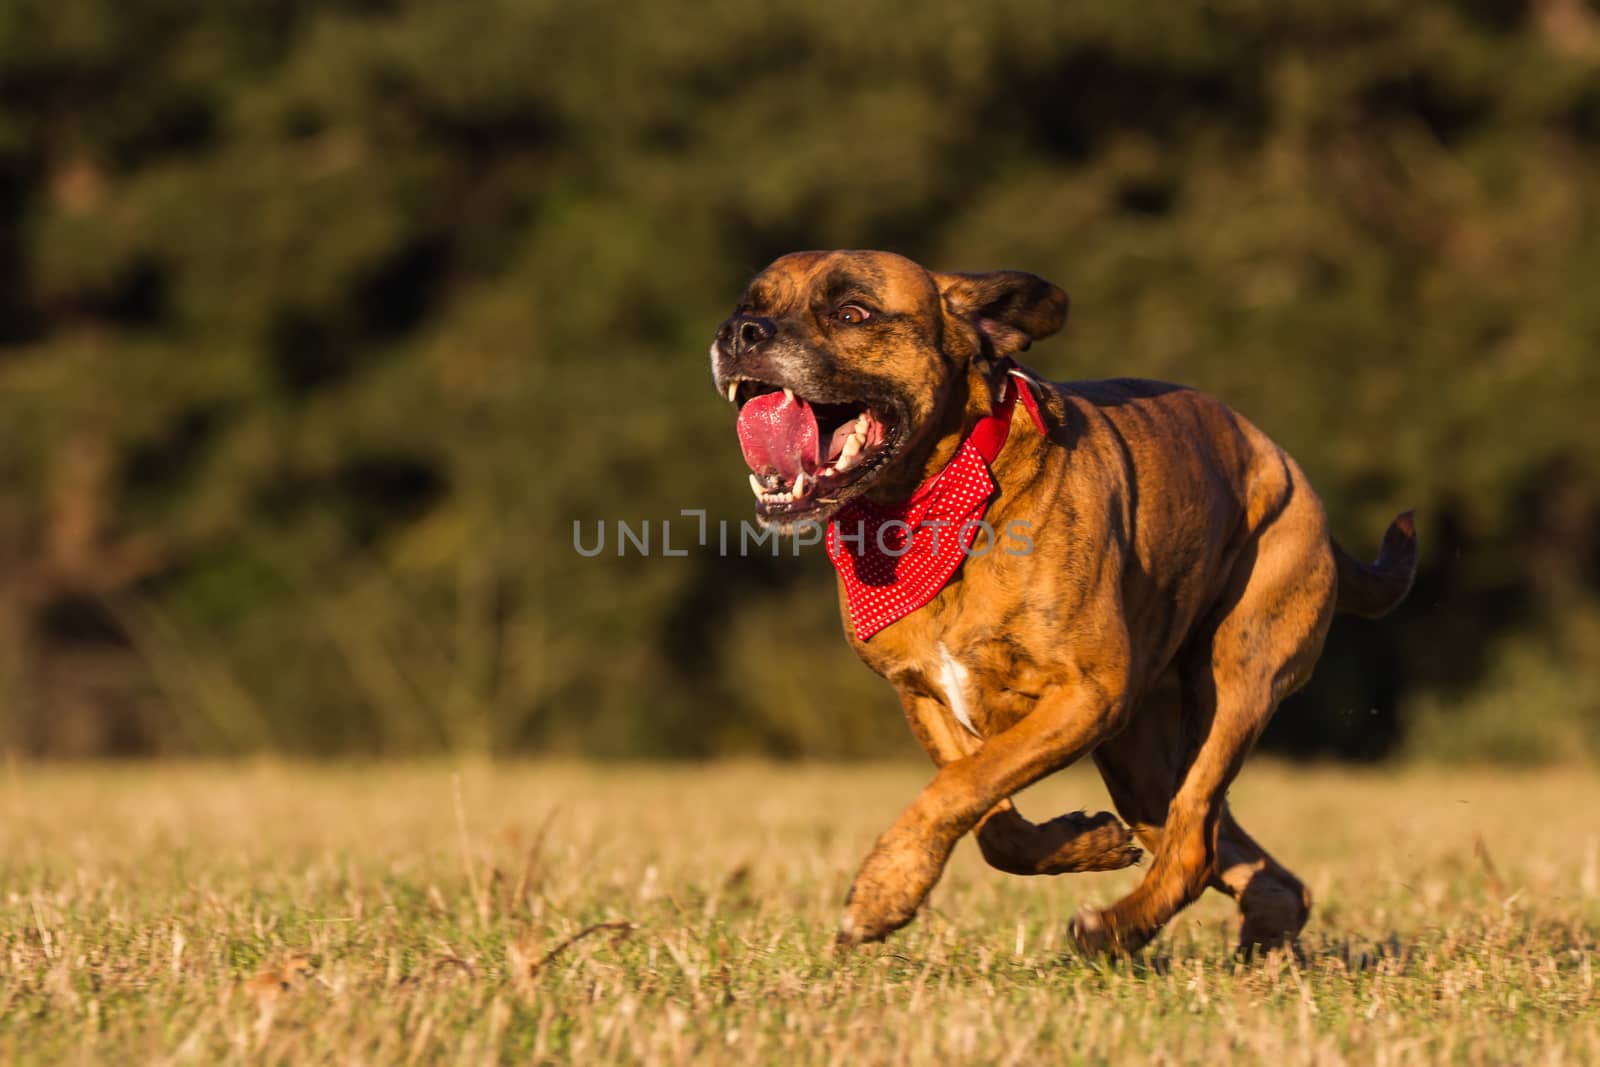 Happy Pet Dog Running With Bandana in field, park or open space